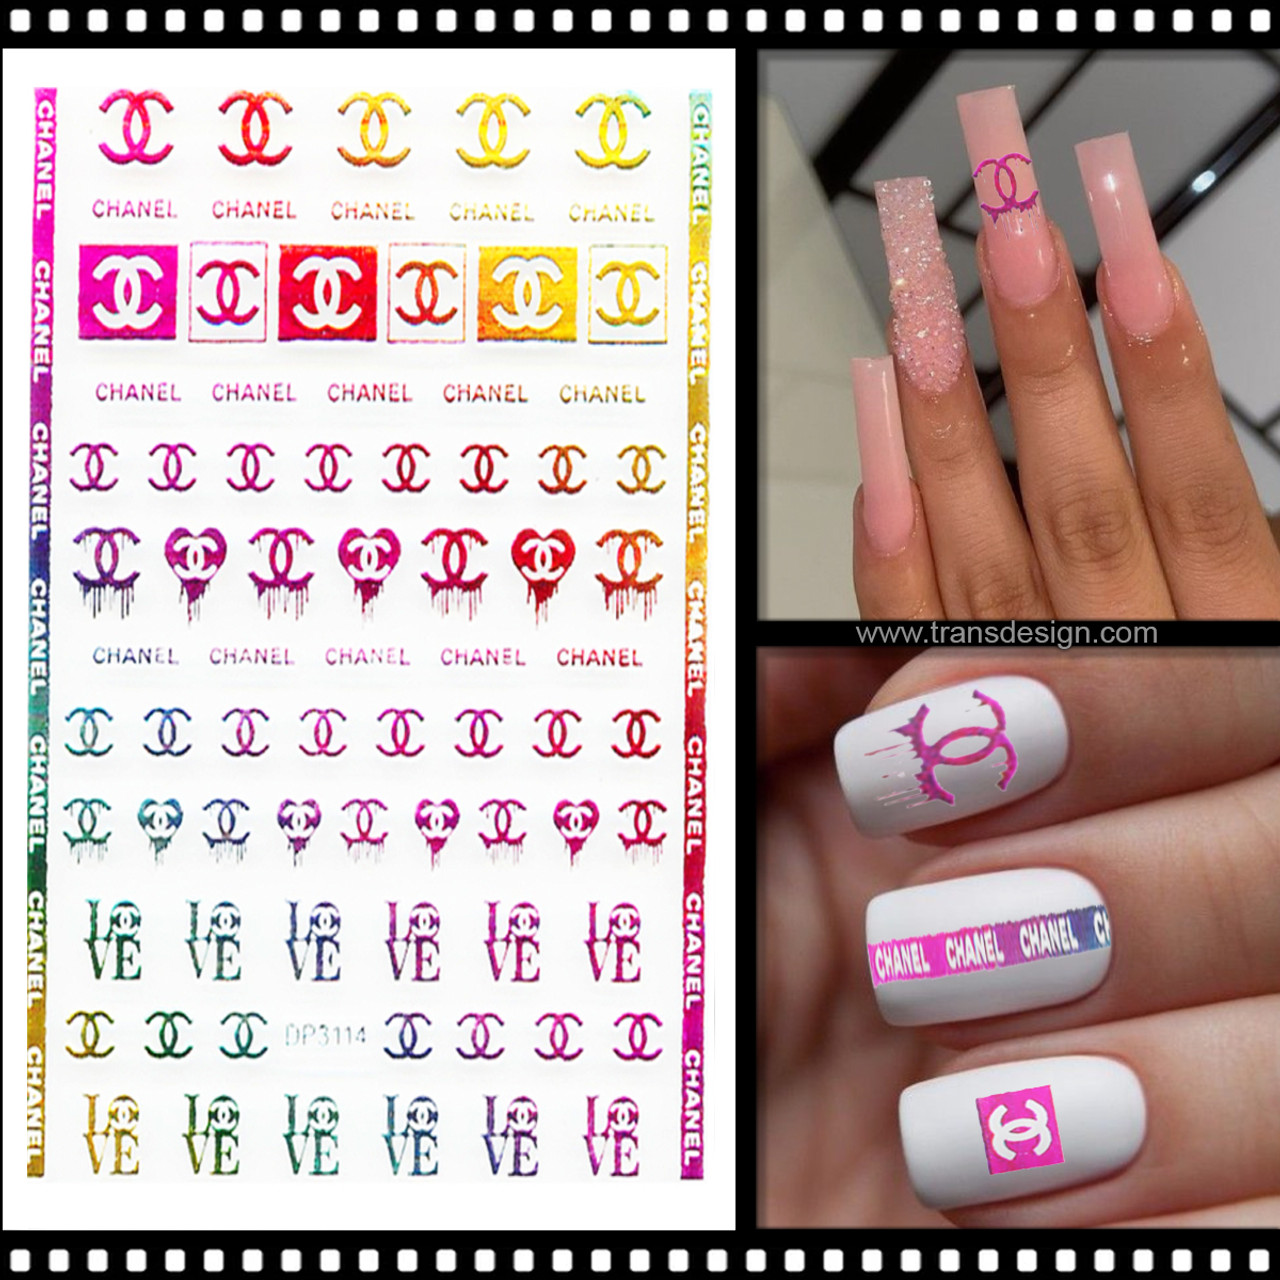 Chanel Tweed Nail Art by DBC DcBeautyCentre Jakarta The only place for your  Nails with Guarantee Promo gel polish starting 40k Nail art  Instagram